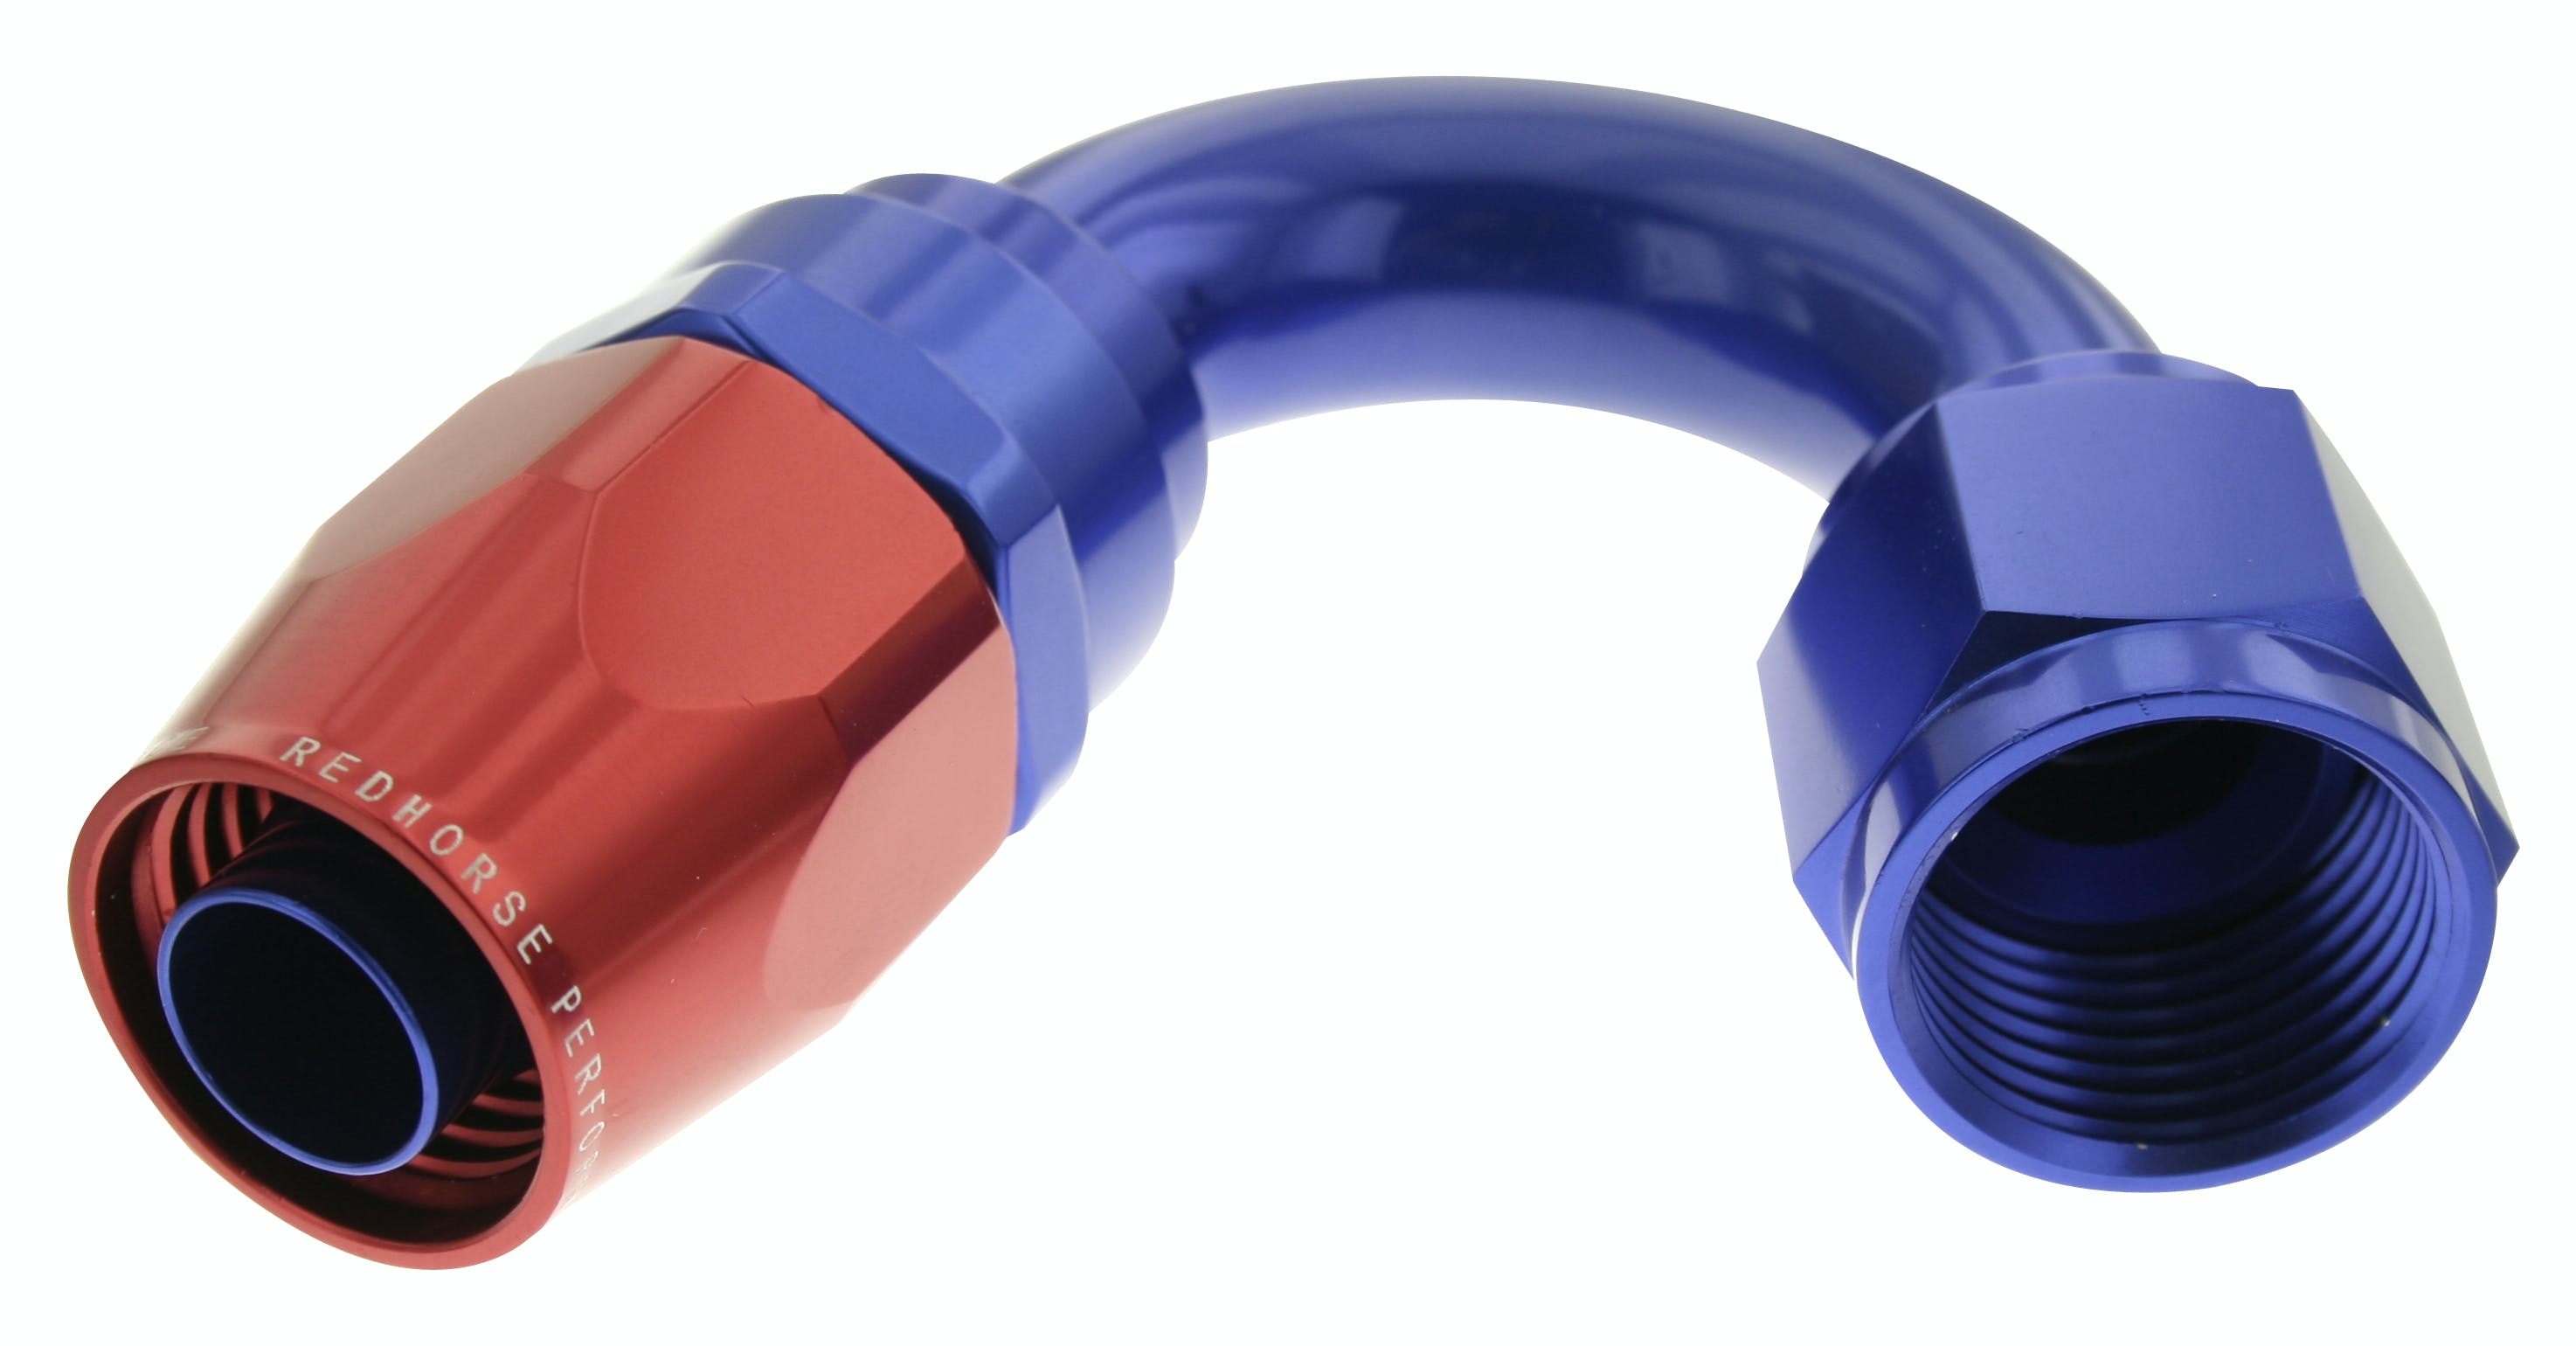 Redhorse Performance 1150-04-1 -04 150 deg double swivel hose end-red and blue